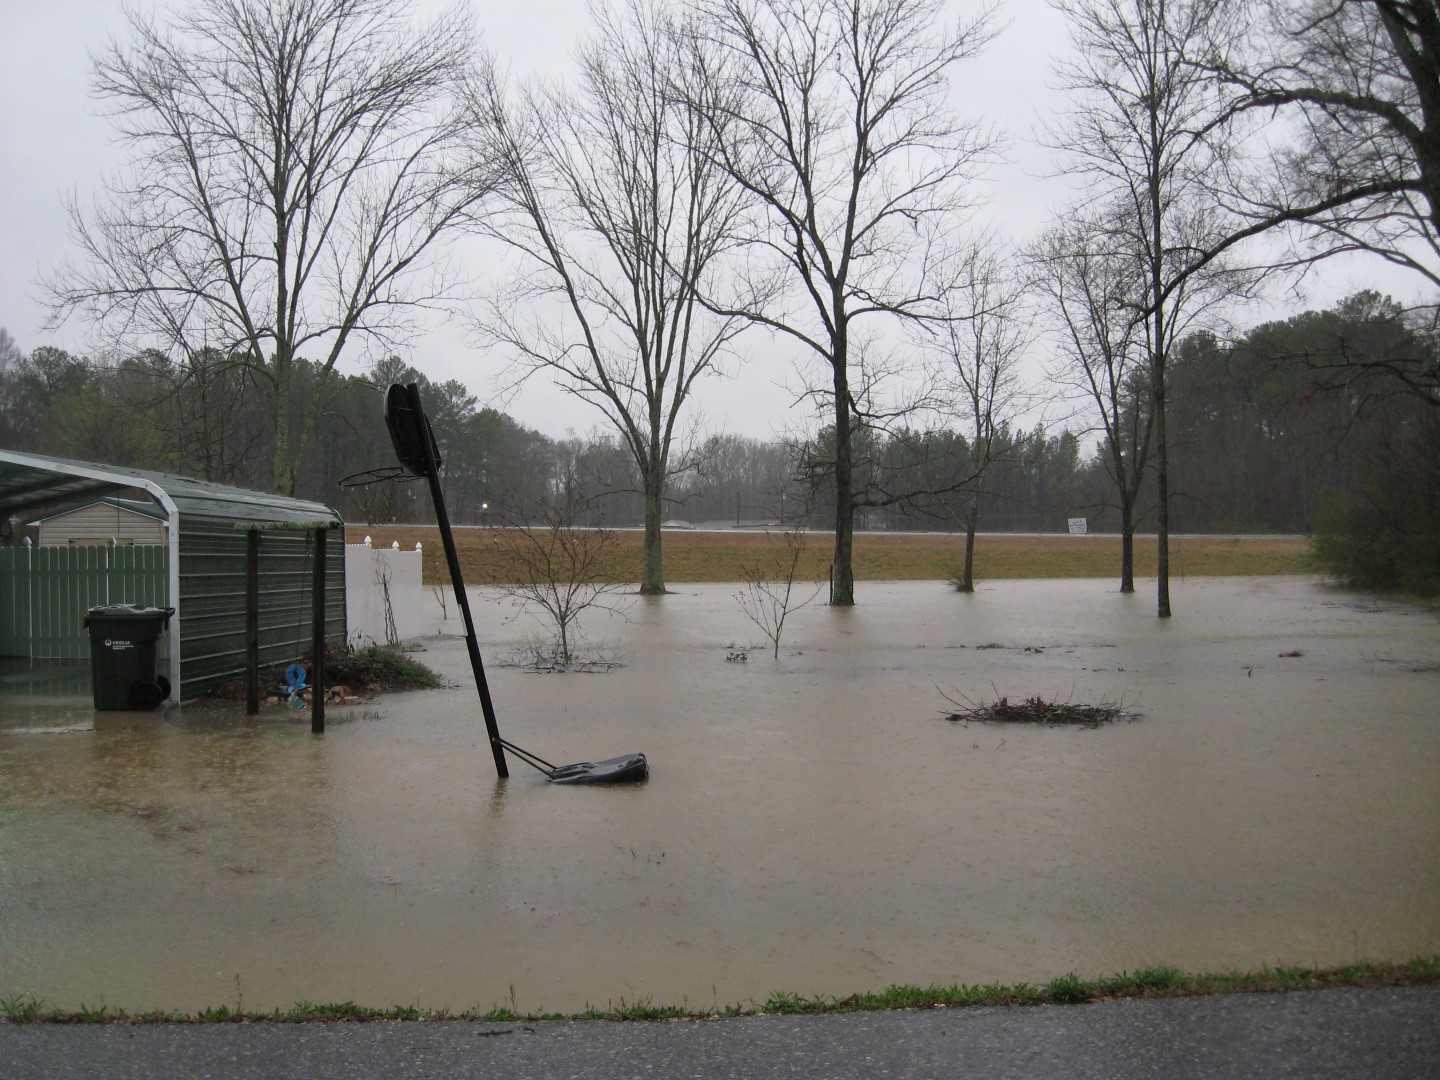 Rain and Severe Storms - March 9, 20111440 x 1080